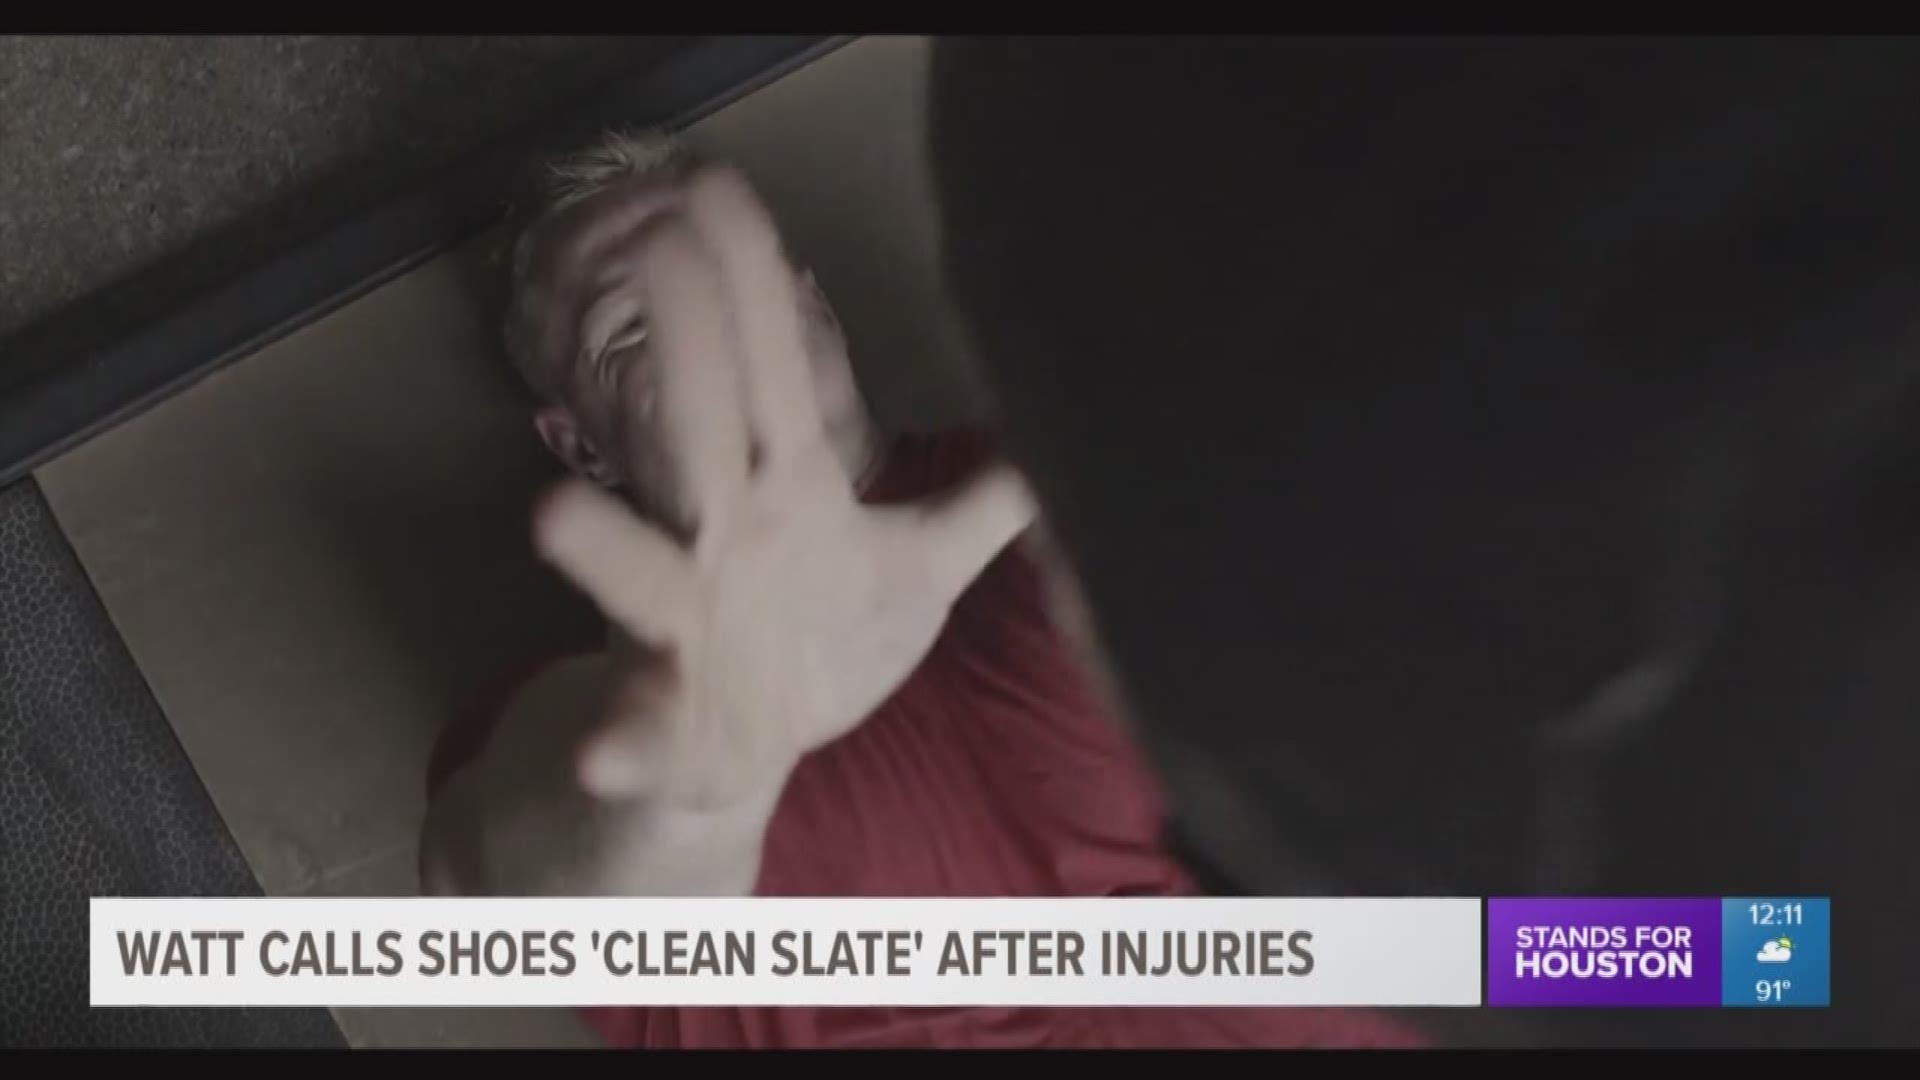 J.J. Watt says his new shoes represent "a clean slate" for him after Houston Texans star has battled injuries the past couple of seasons.